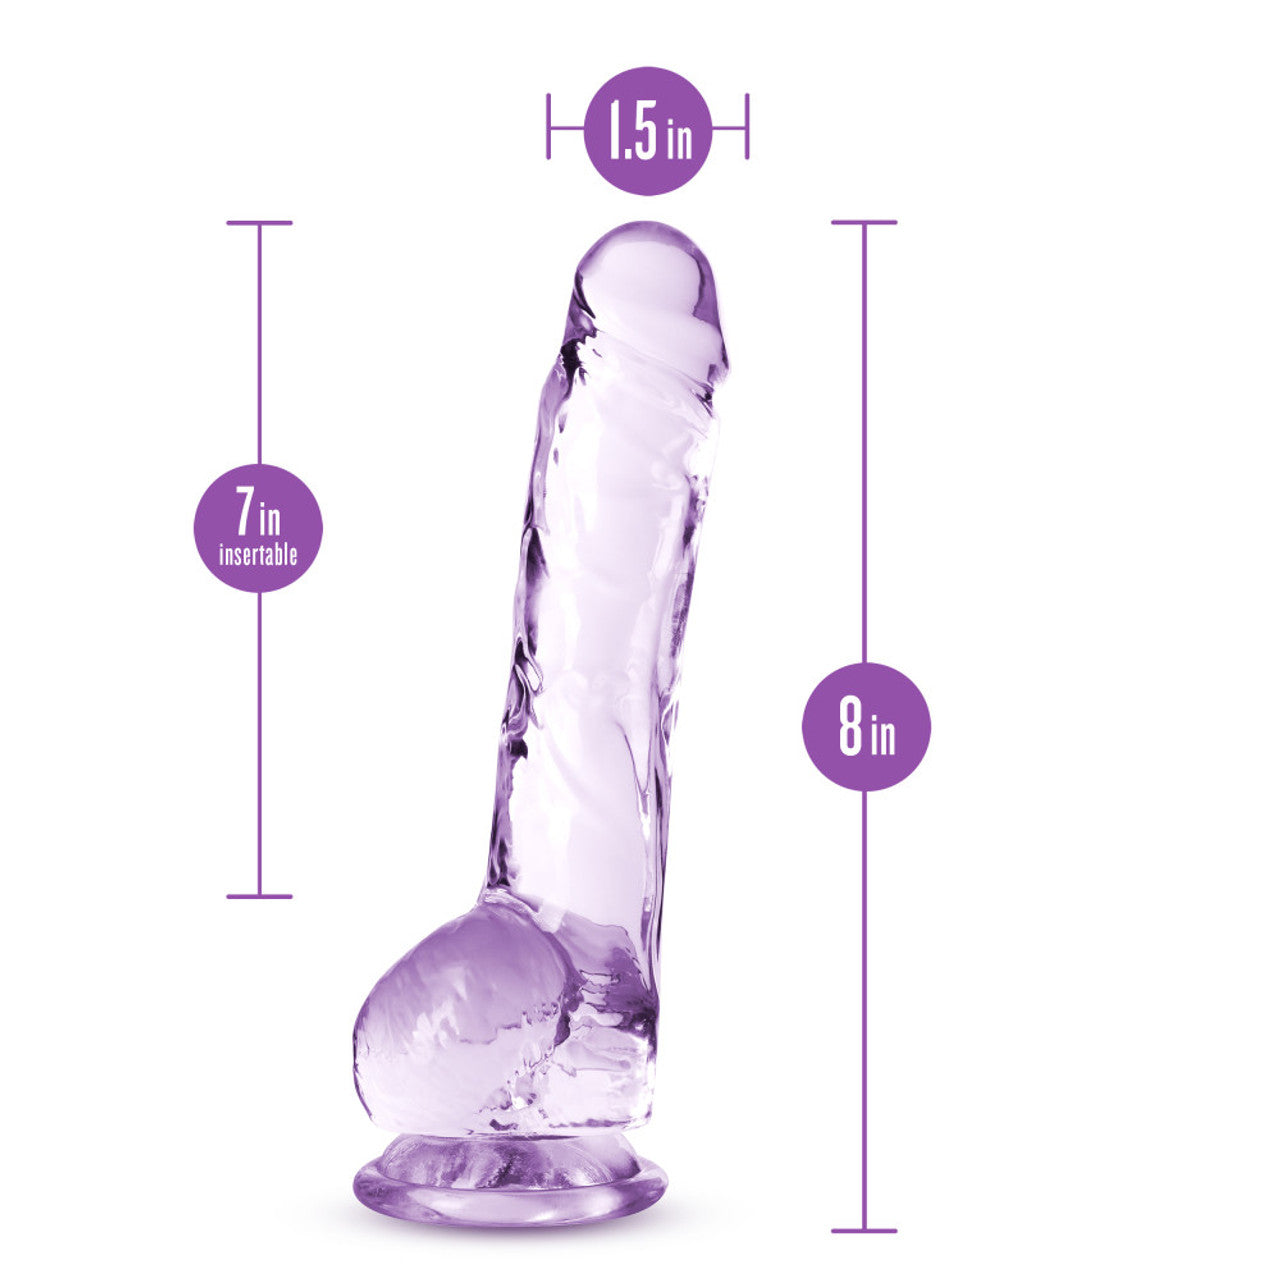 Naturally Yours 8" Crystalline Dildo - Amethyst